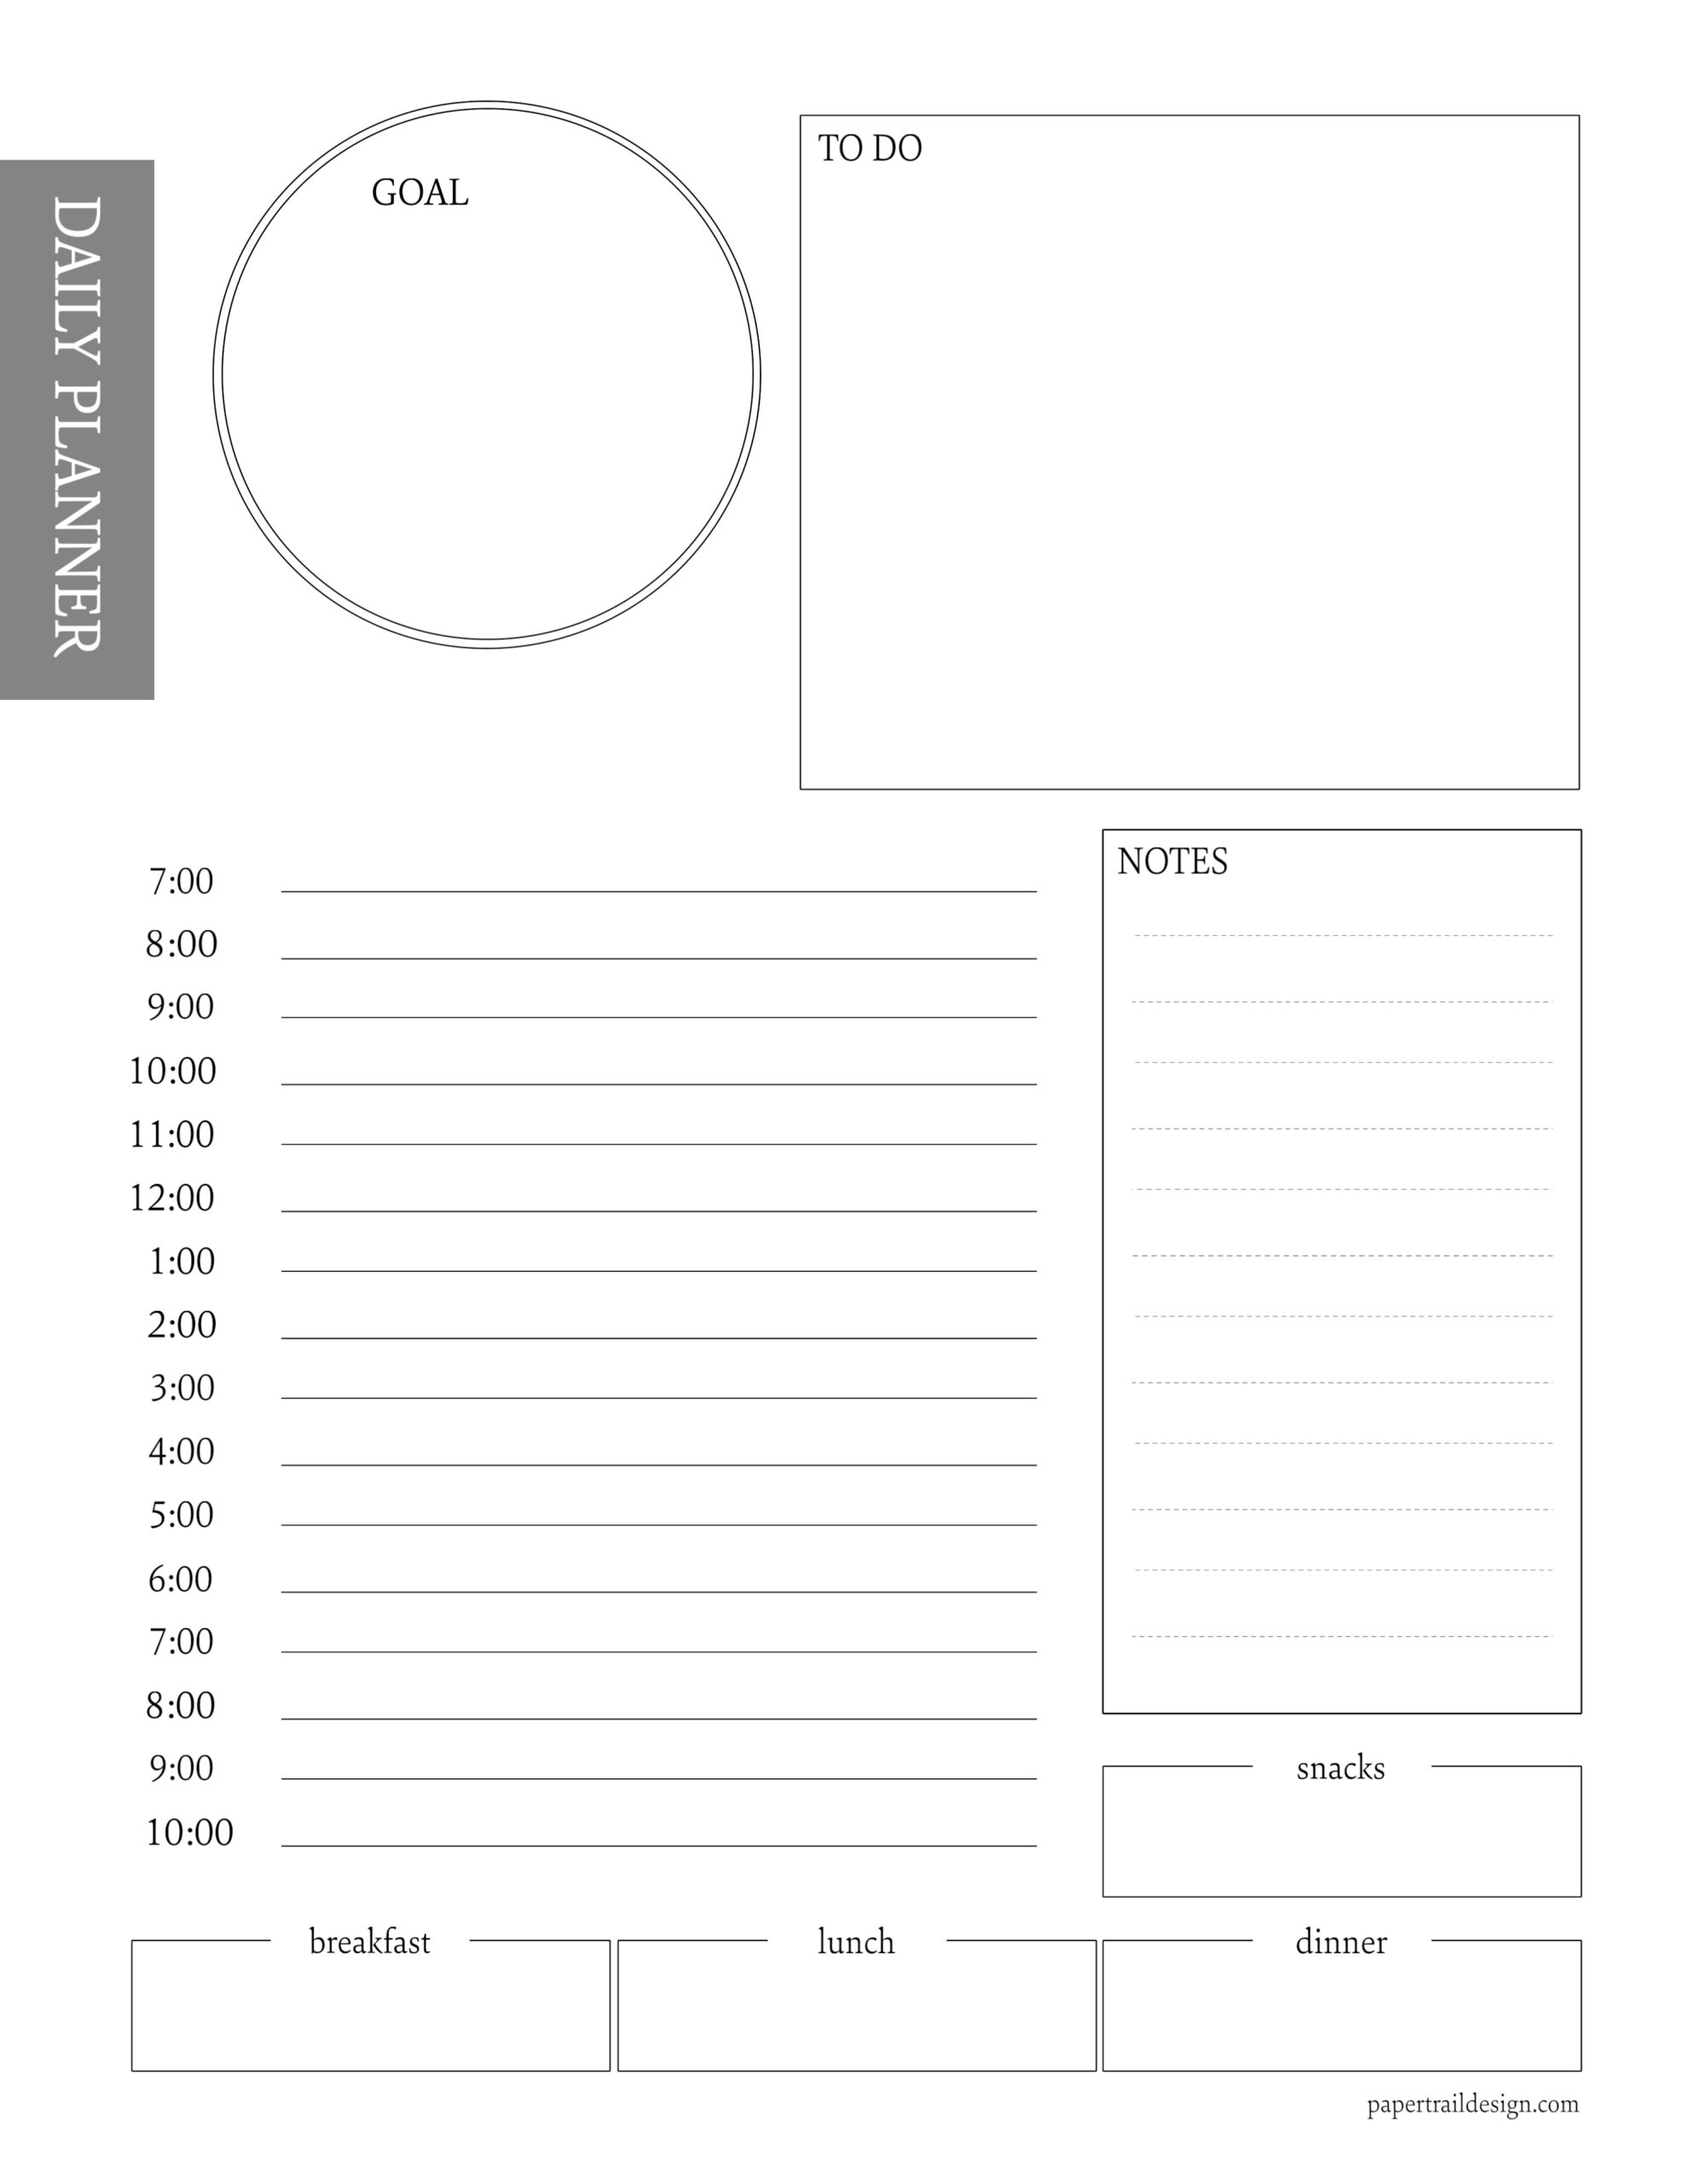 Free Printable Daily Journal Pages FREE PRINTABLE TEMPLATES